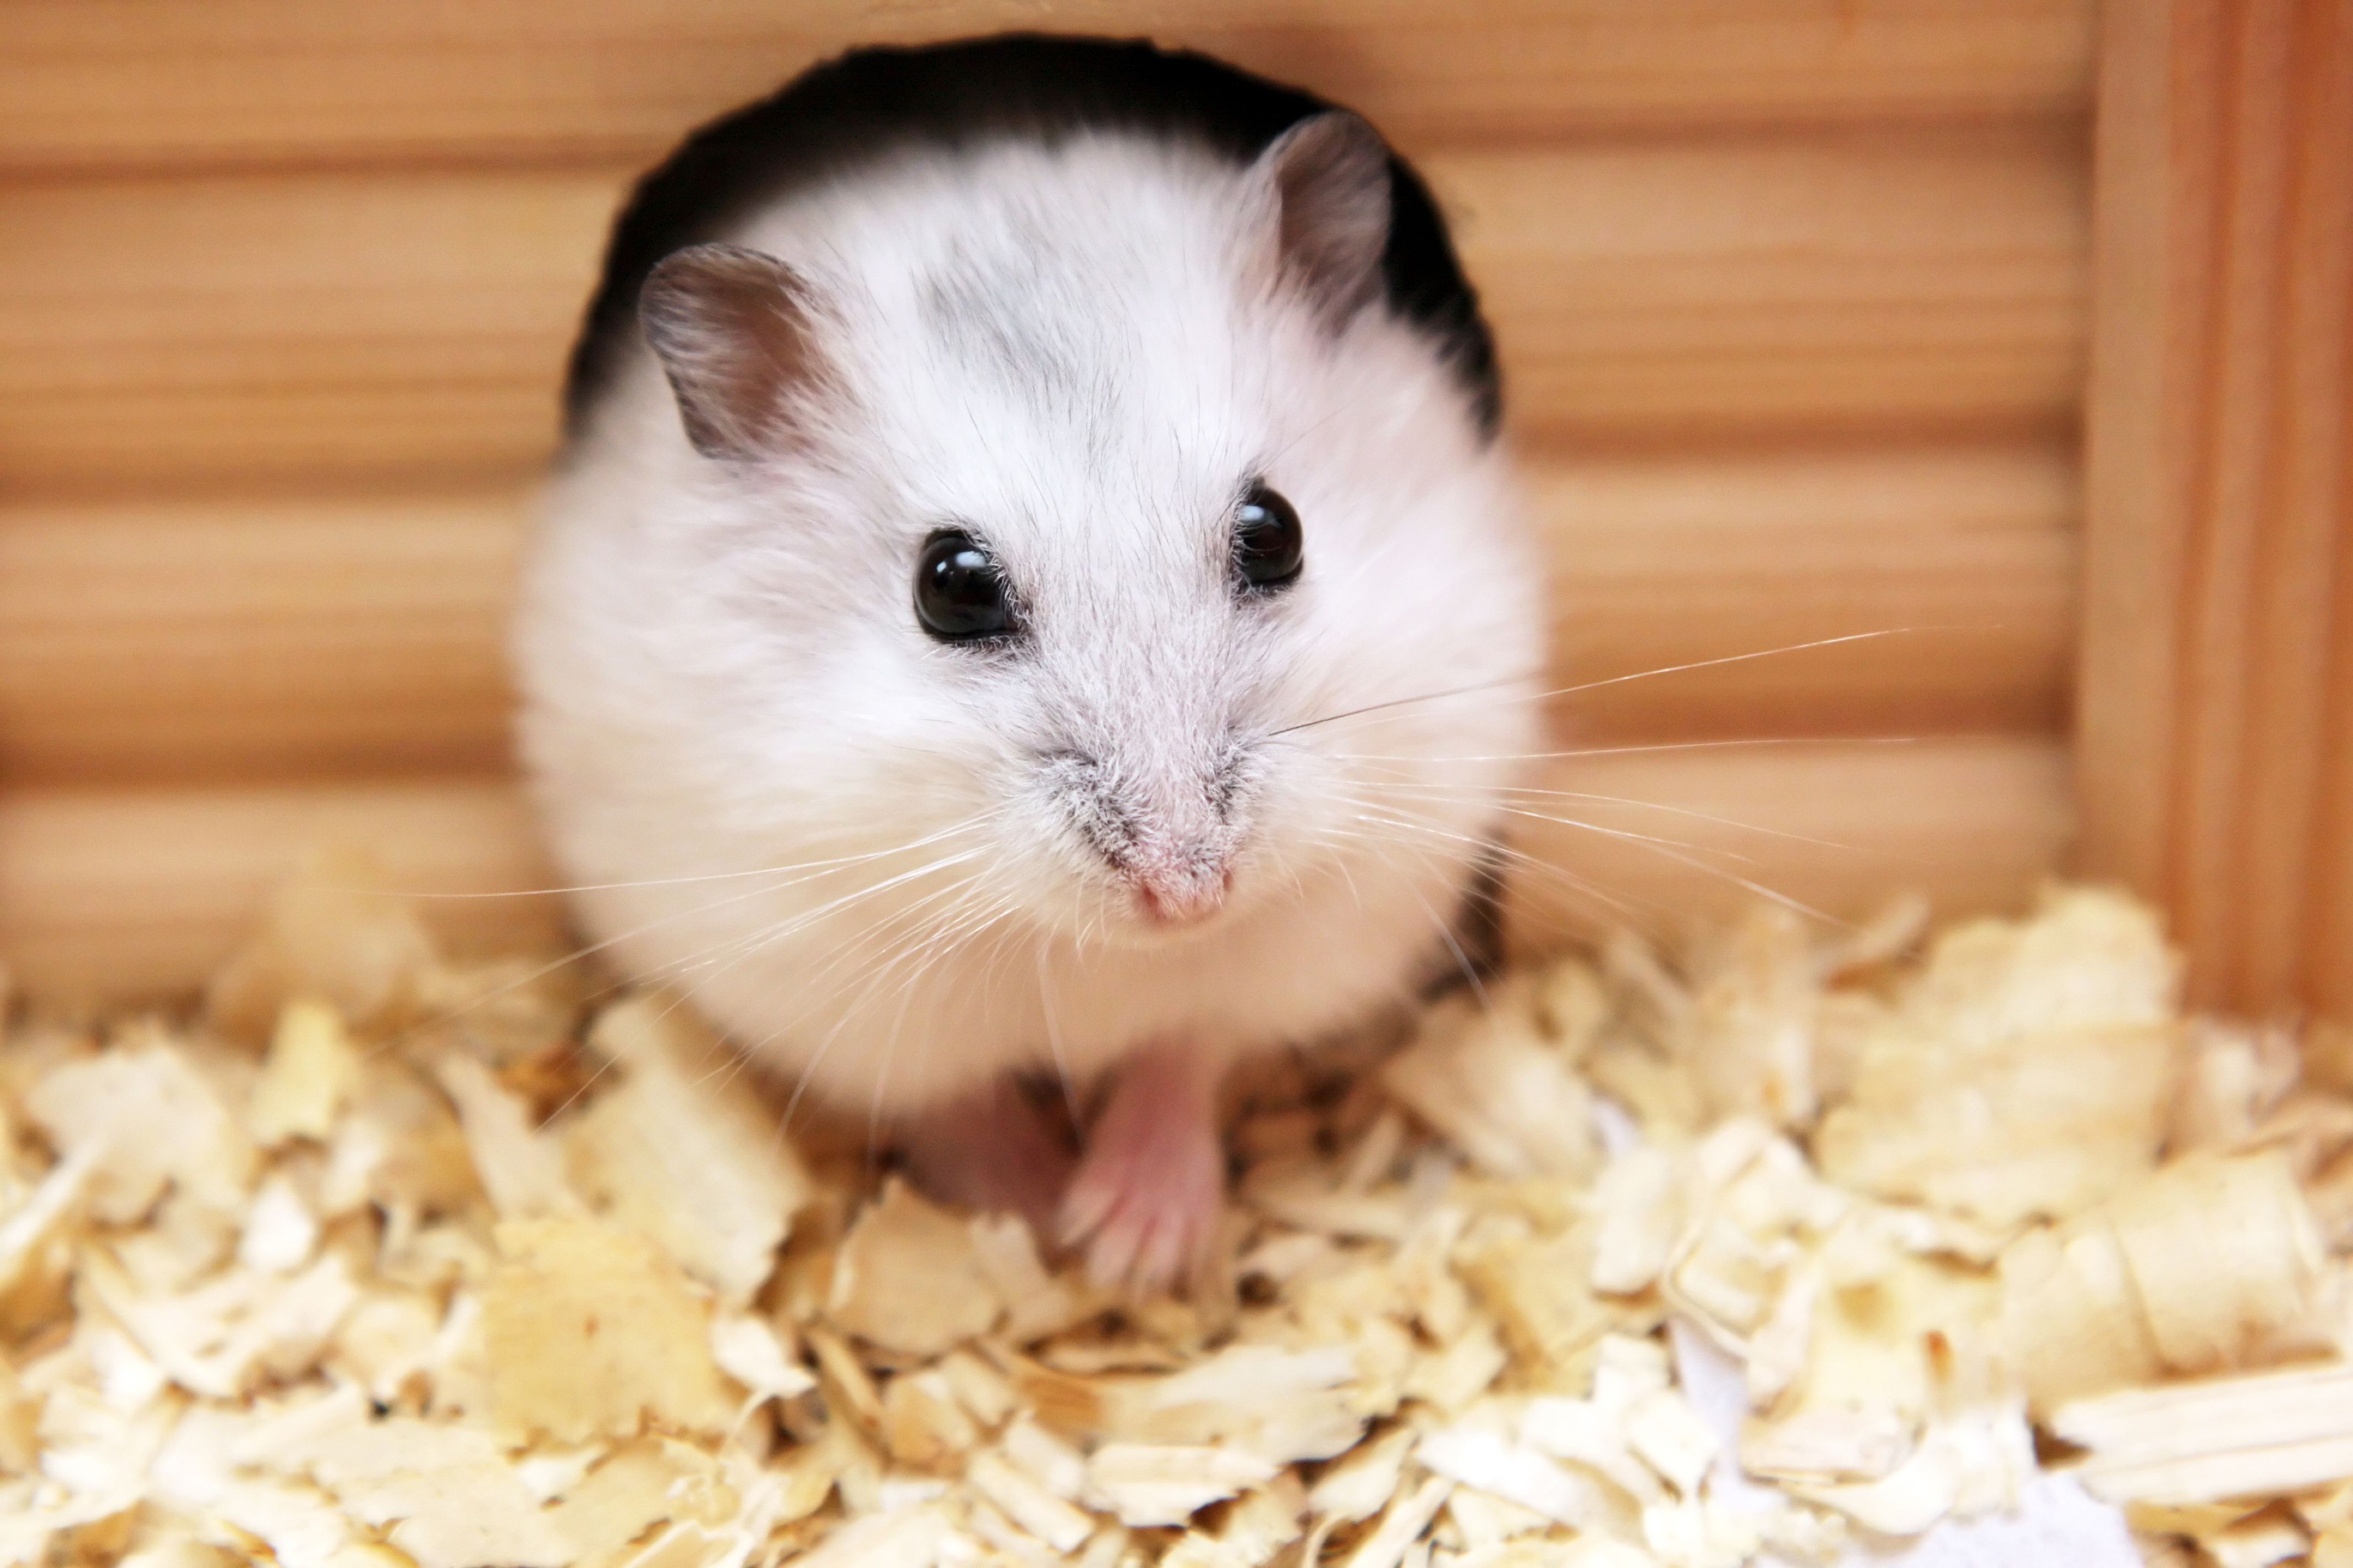 Cute Baby Hamster Picture: Desktop HD Wallpaper Free Image, Picture, Photo on DailyHDWallpaper.com